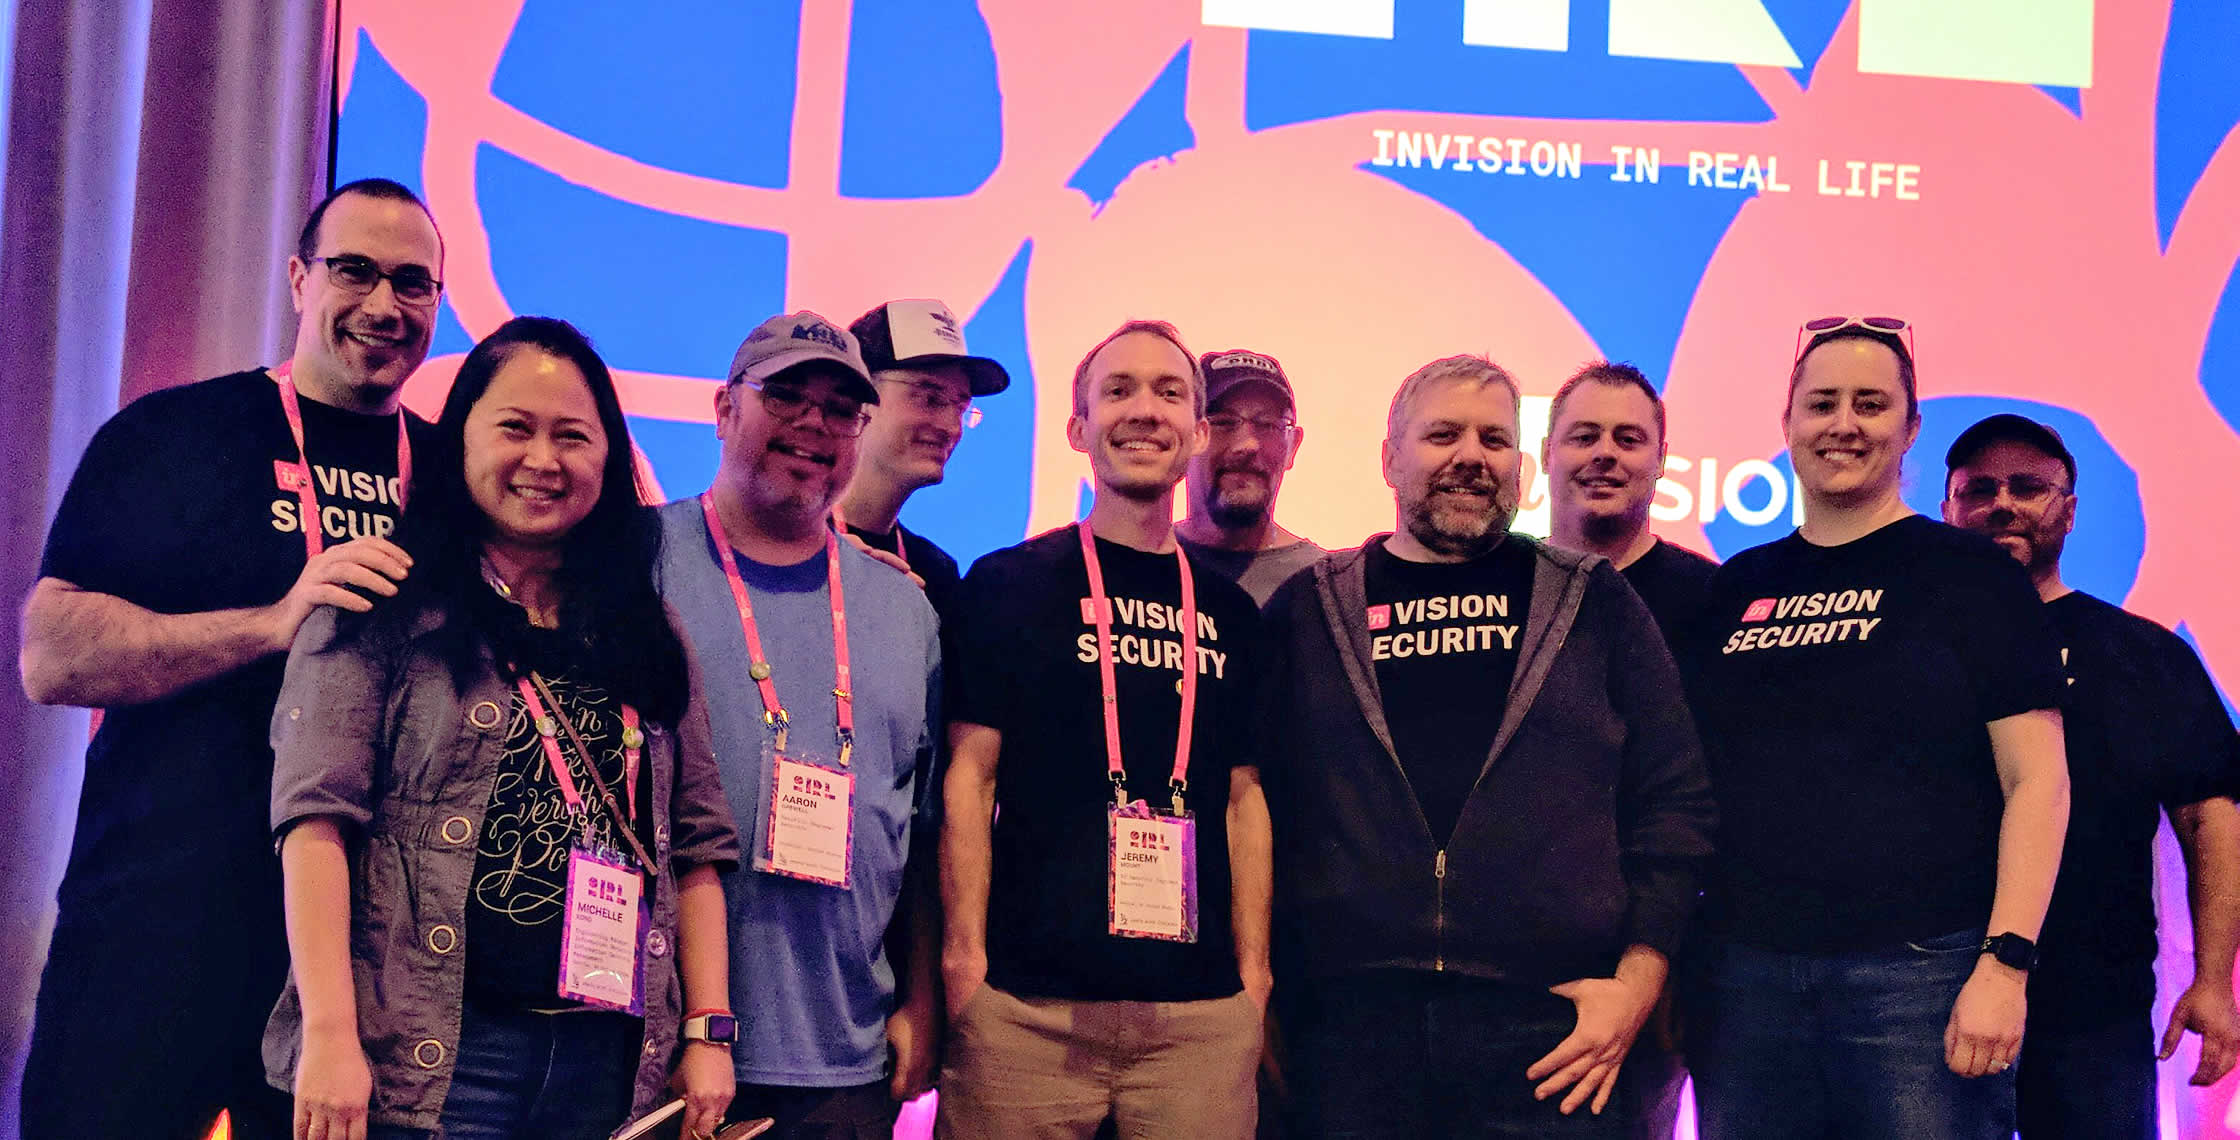 Ben Nadel at InVision In Real Life (IRL) 2018 (Hollywood, CA) with: Michelle Kong, Aaron Grewell, Shawn Grigson, Jeremy Mount, Kevin Johnson, David Epler, Johnathan Hunt, Sara Dunnack, and Jeremy Kicklighter